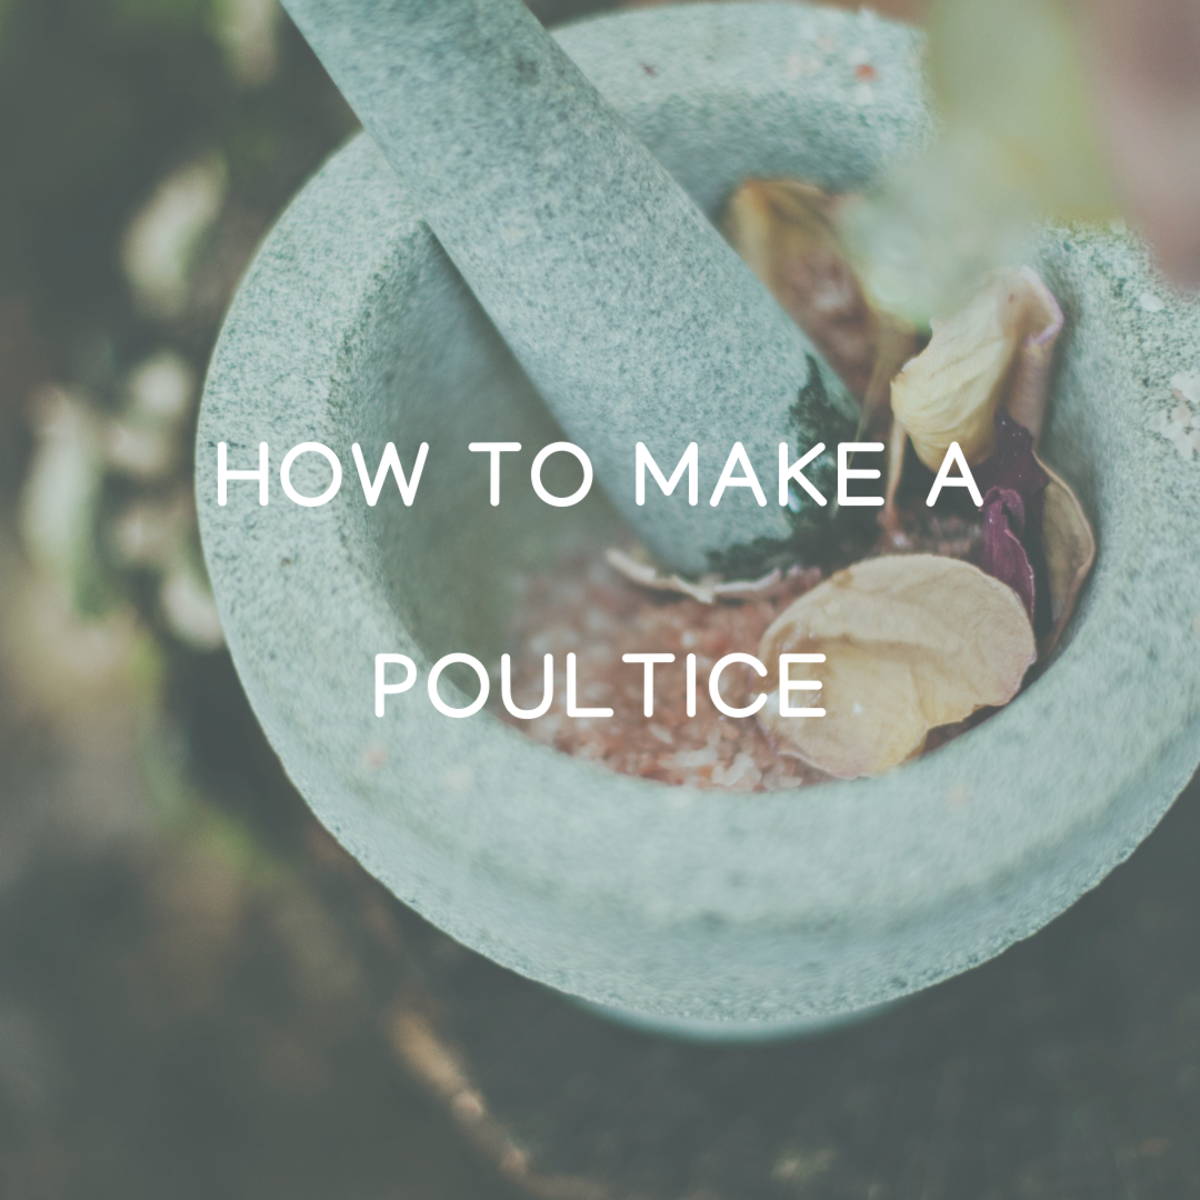 How to Make a Poultice